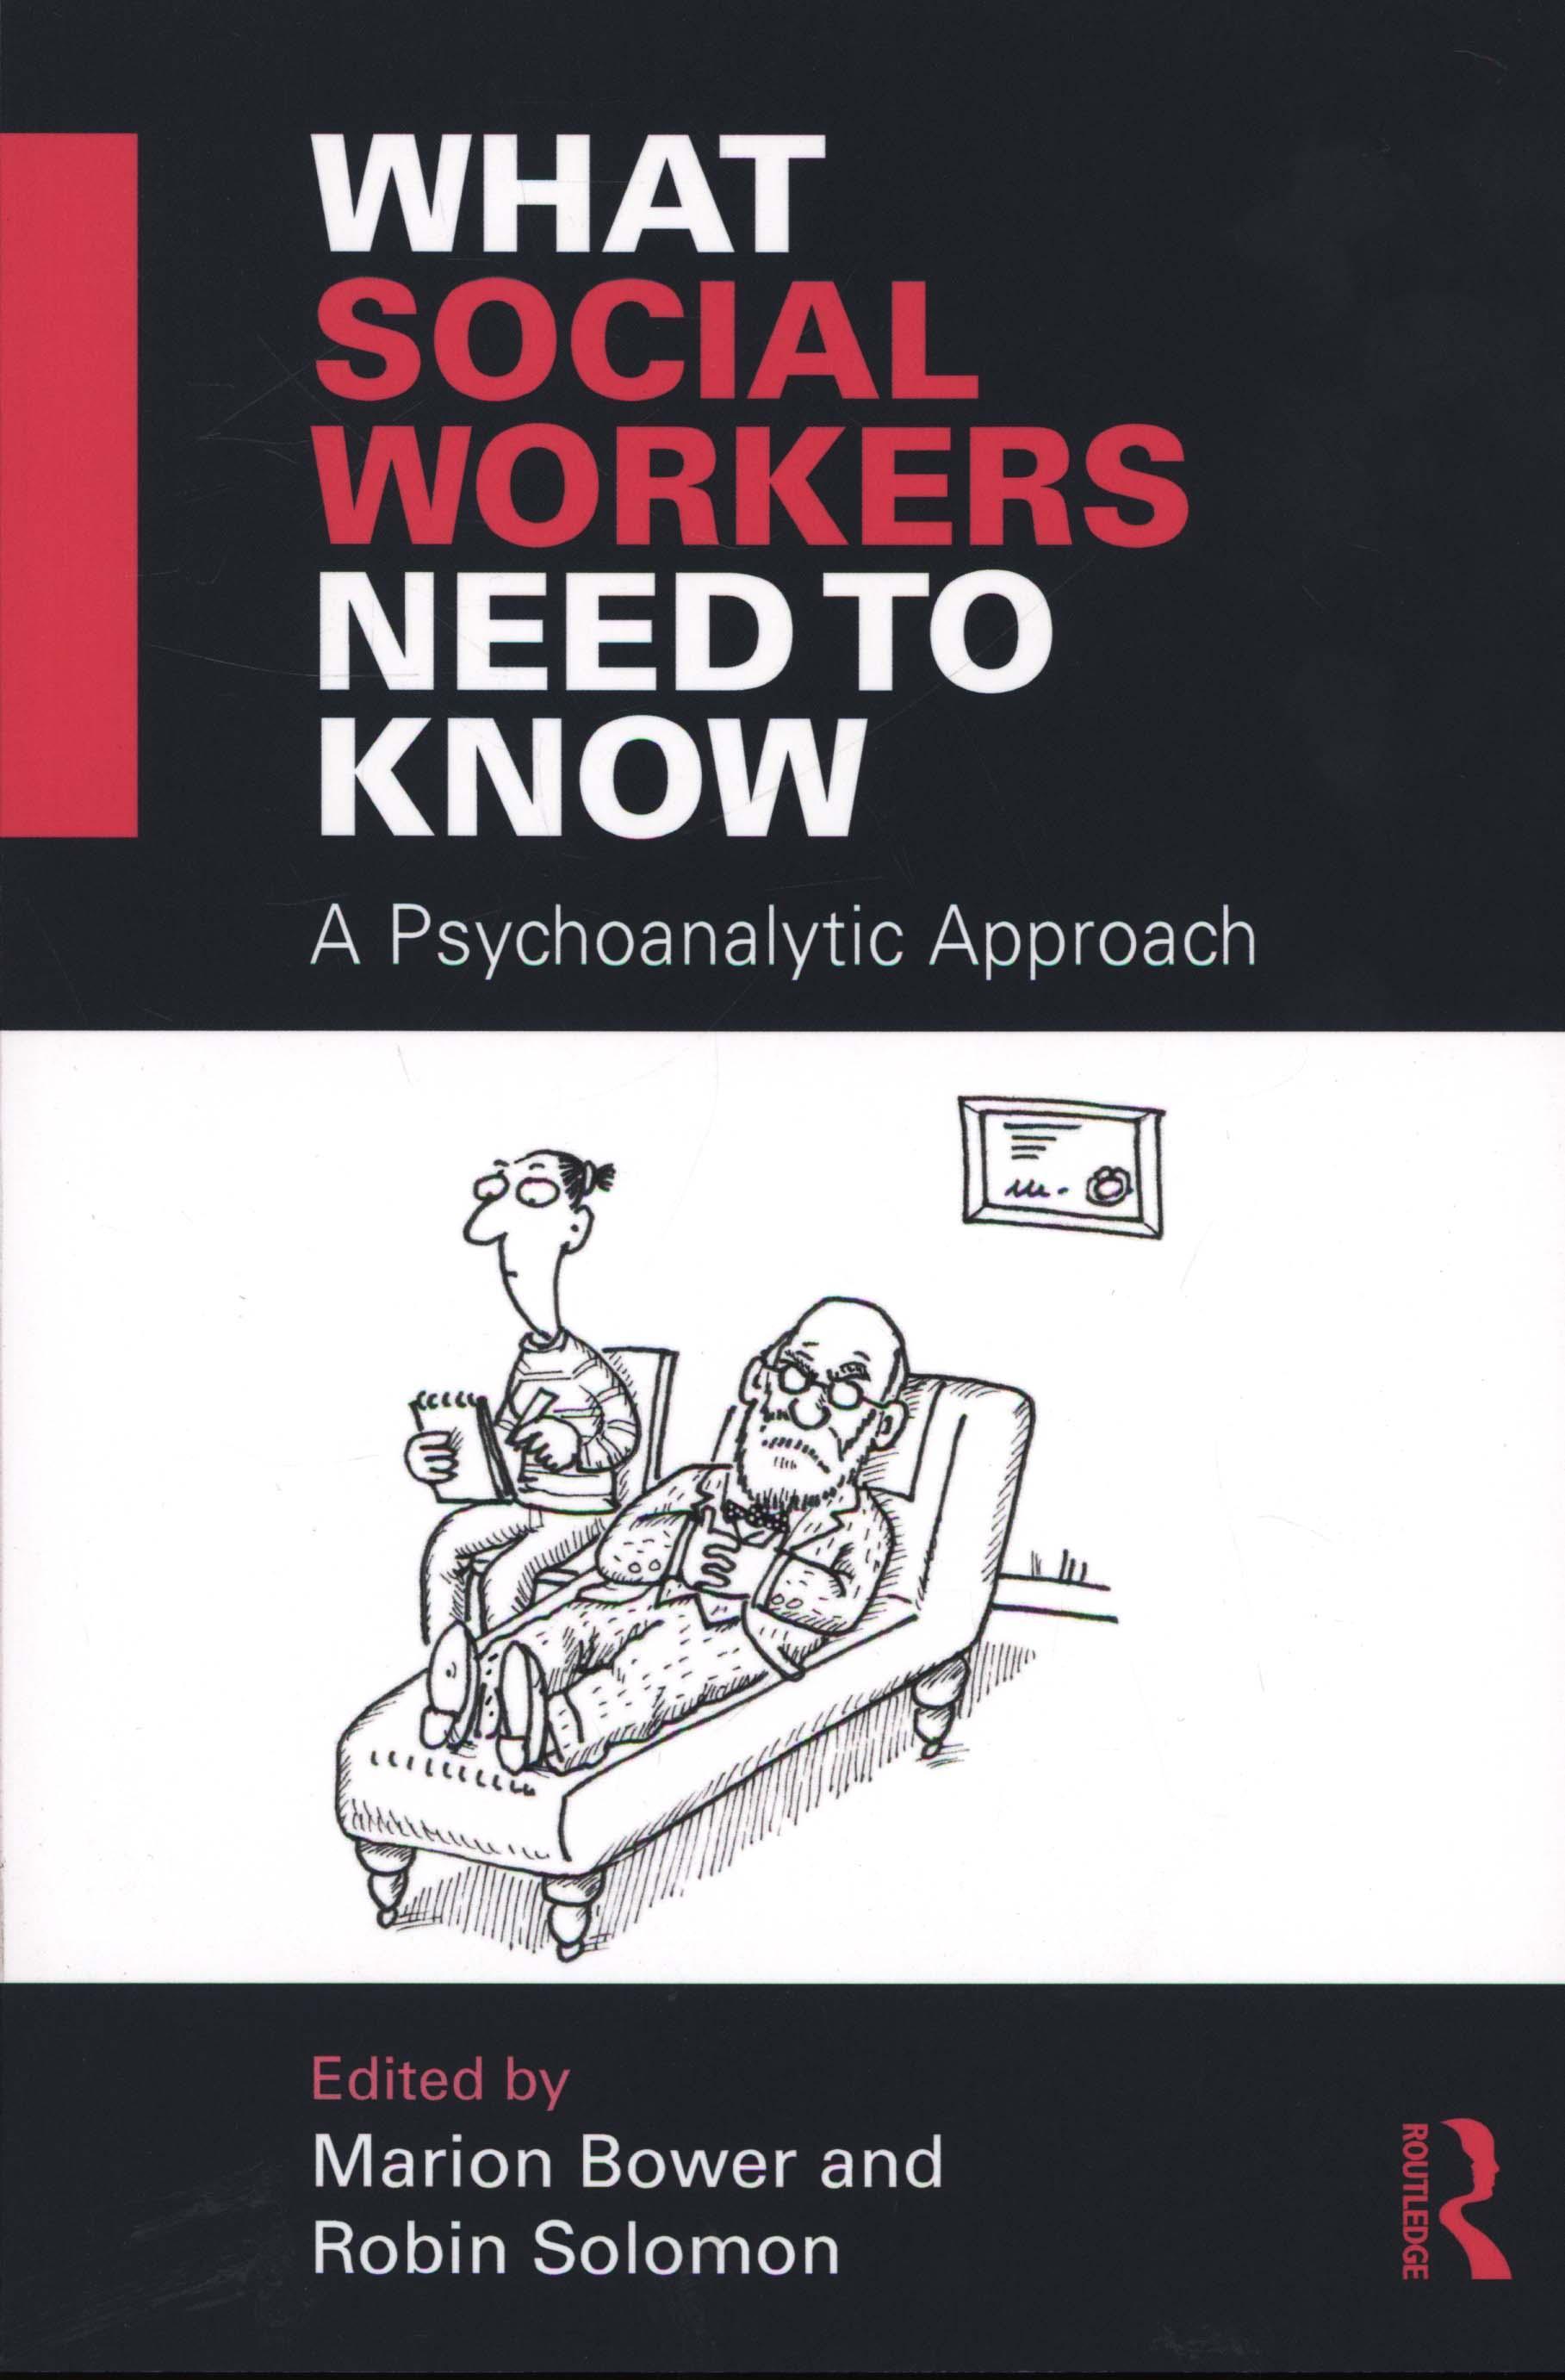 What Social Workers Need to Know